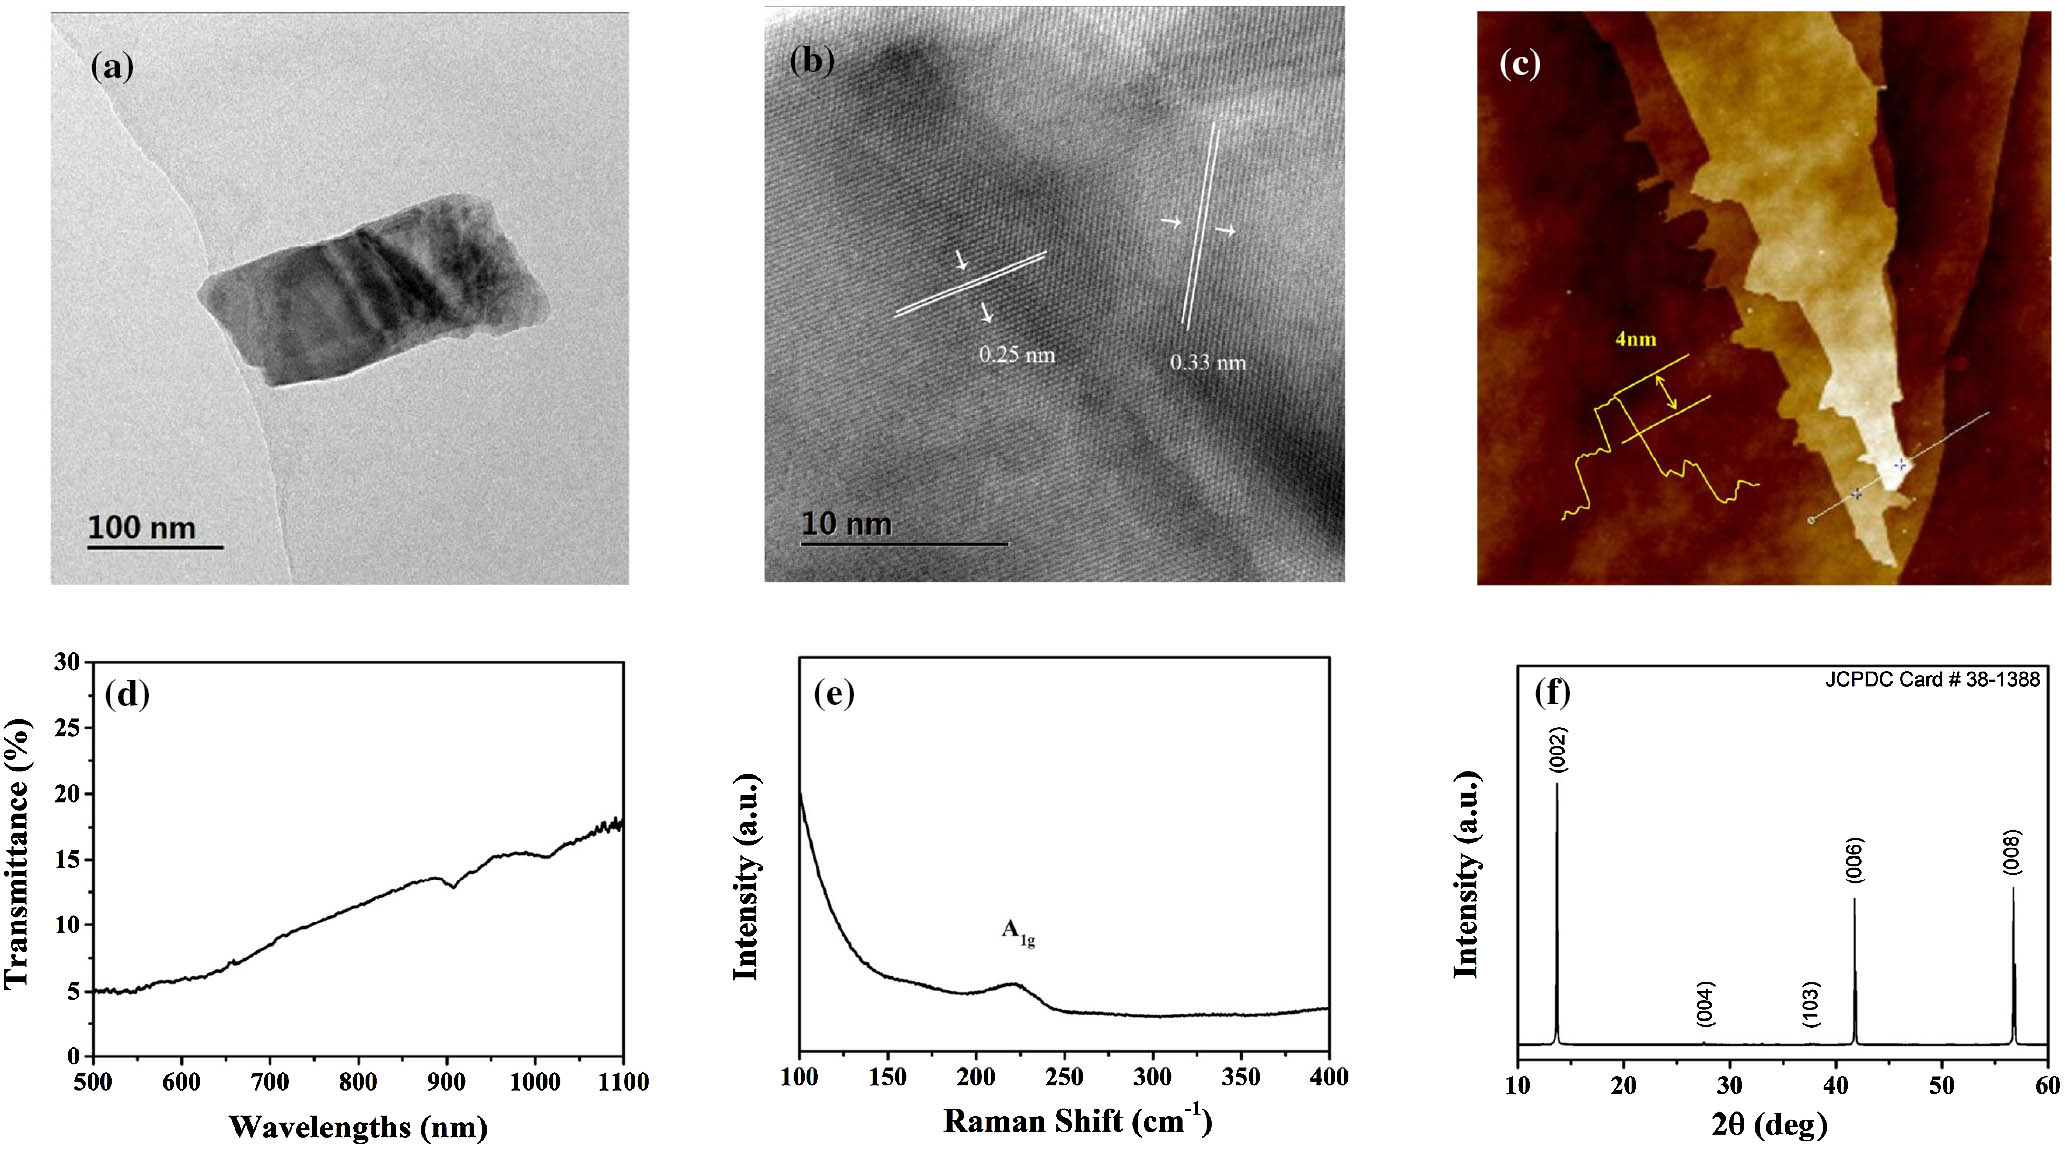 Characterization of WSe2 nanoparticles after stable storing for two weeks. (a) TEM image, (b) HRTEM image, (c) AFM image, (d) transmittance spectrum, (e) Raman spectrum, and (f) XRD pattern.